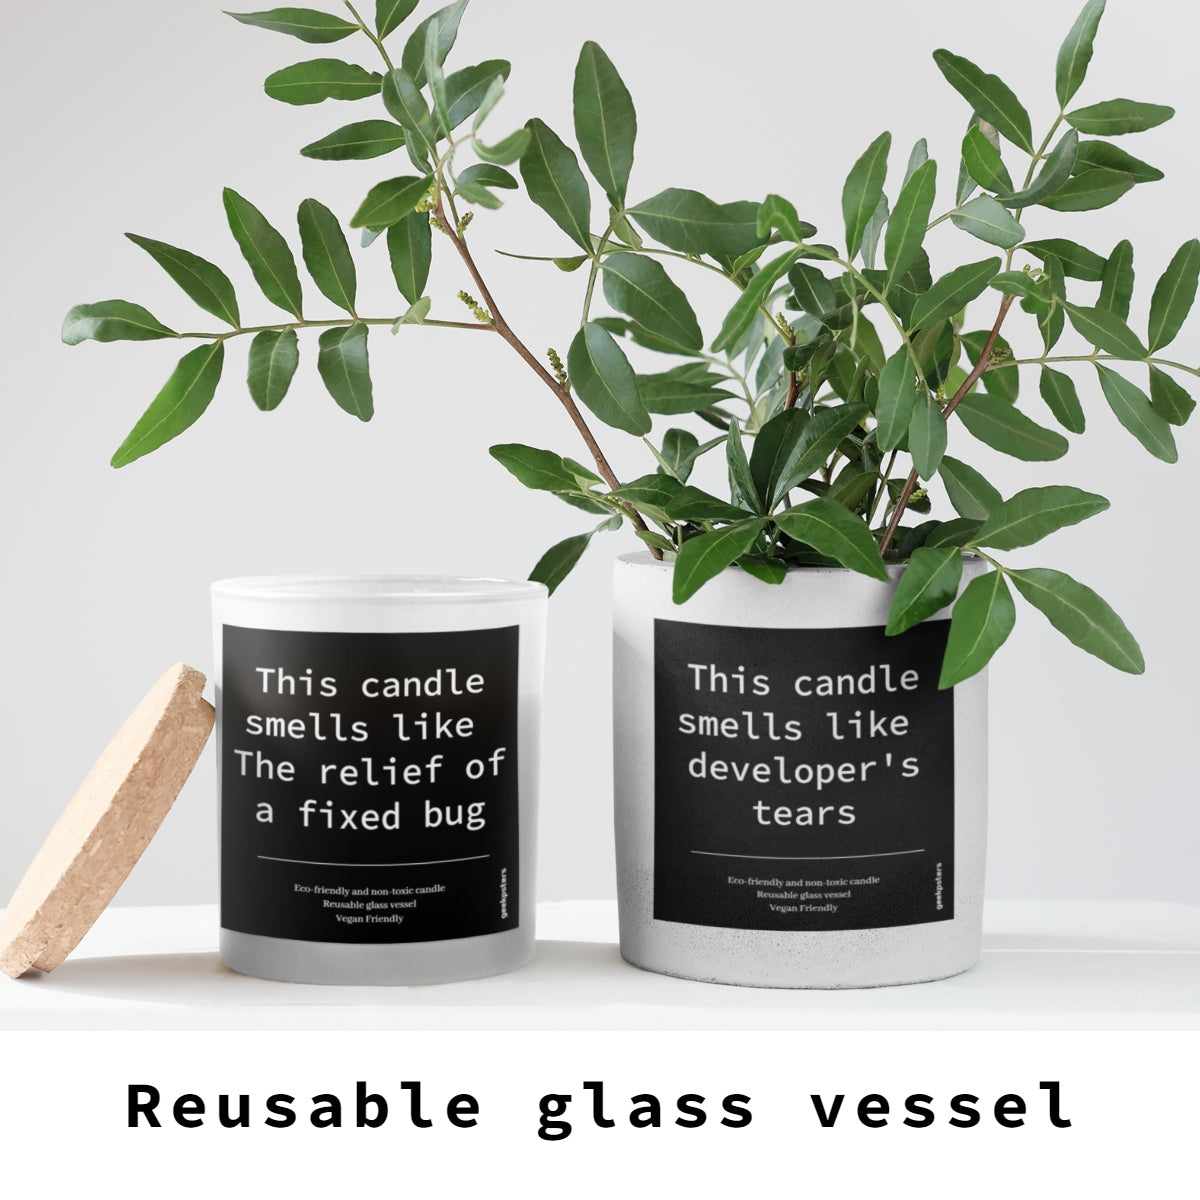 Two "This Candle Smells Like The Excitement of Learning a New Programming Language" soy candles in reusable glass vessels with humorous labels related to software development, accompanied by a green plant branch.